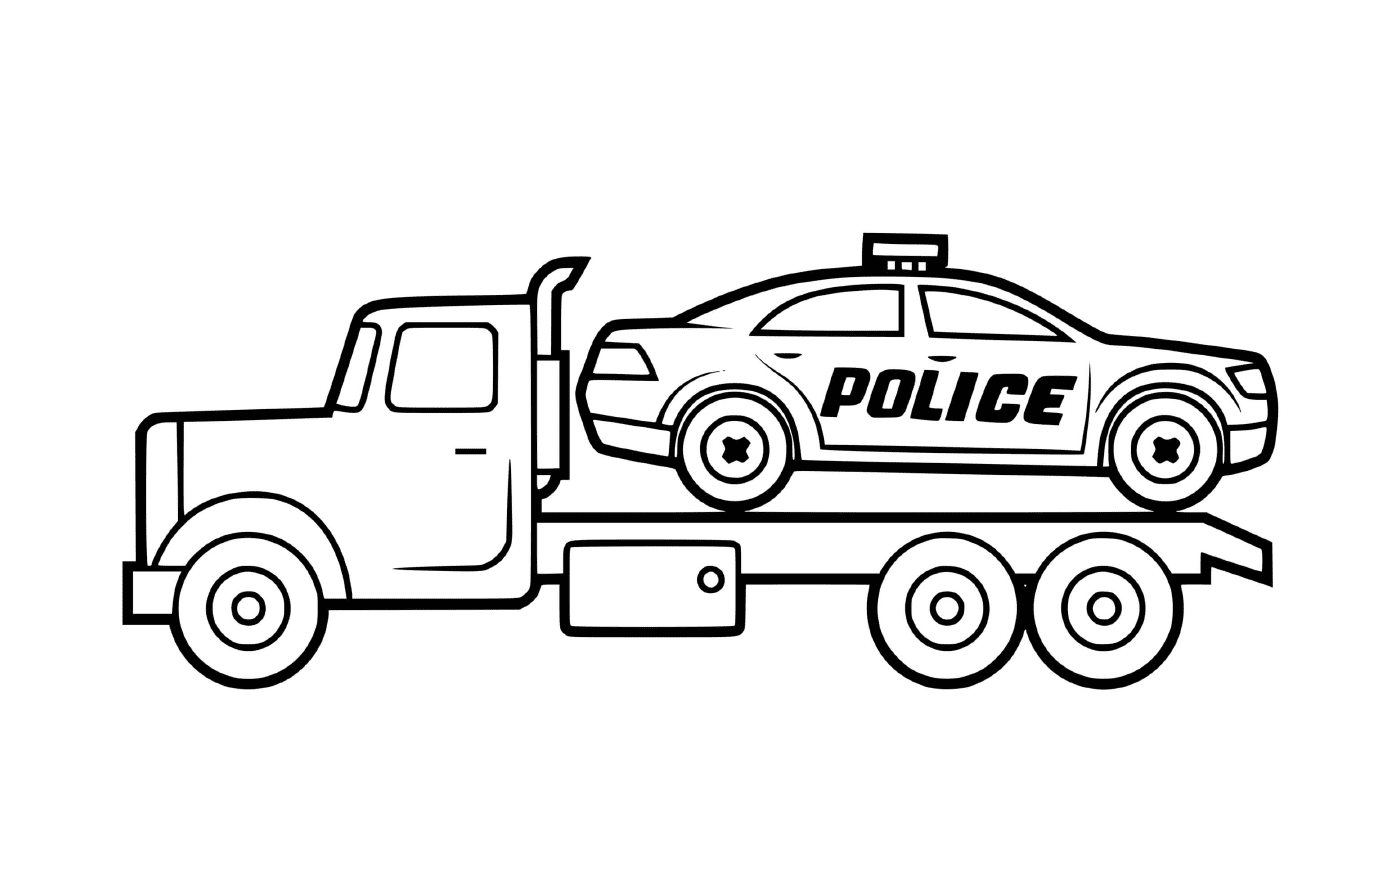  Car towing police 